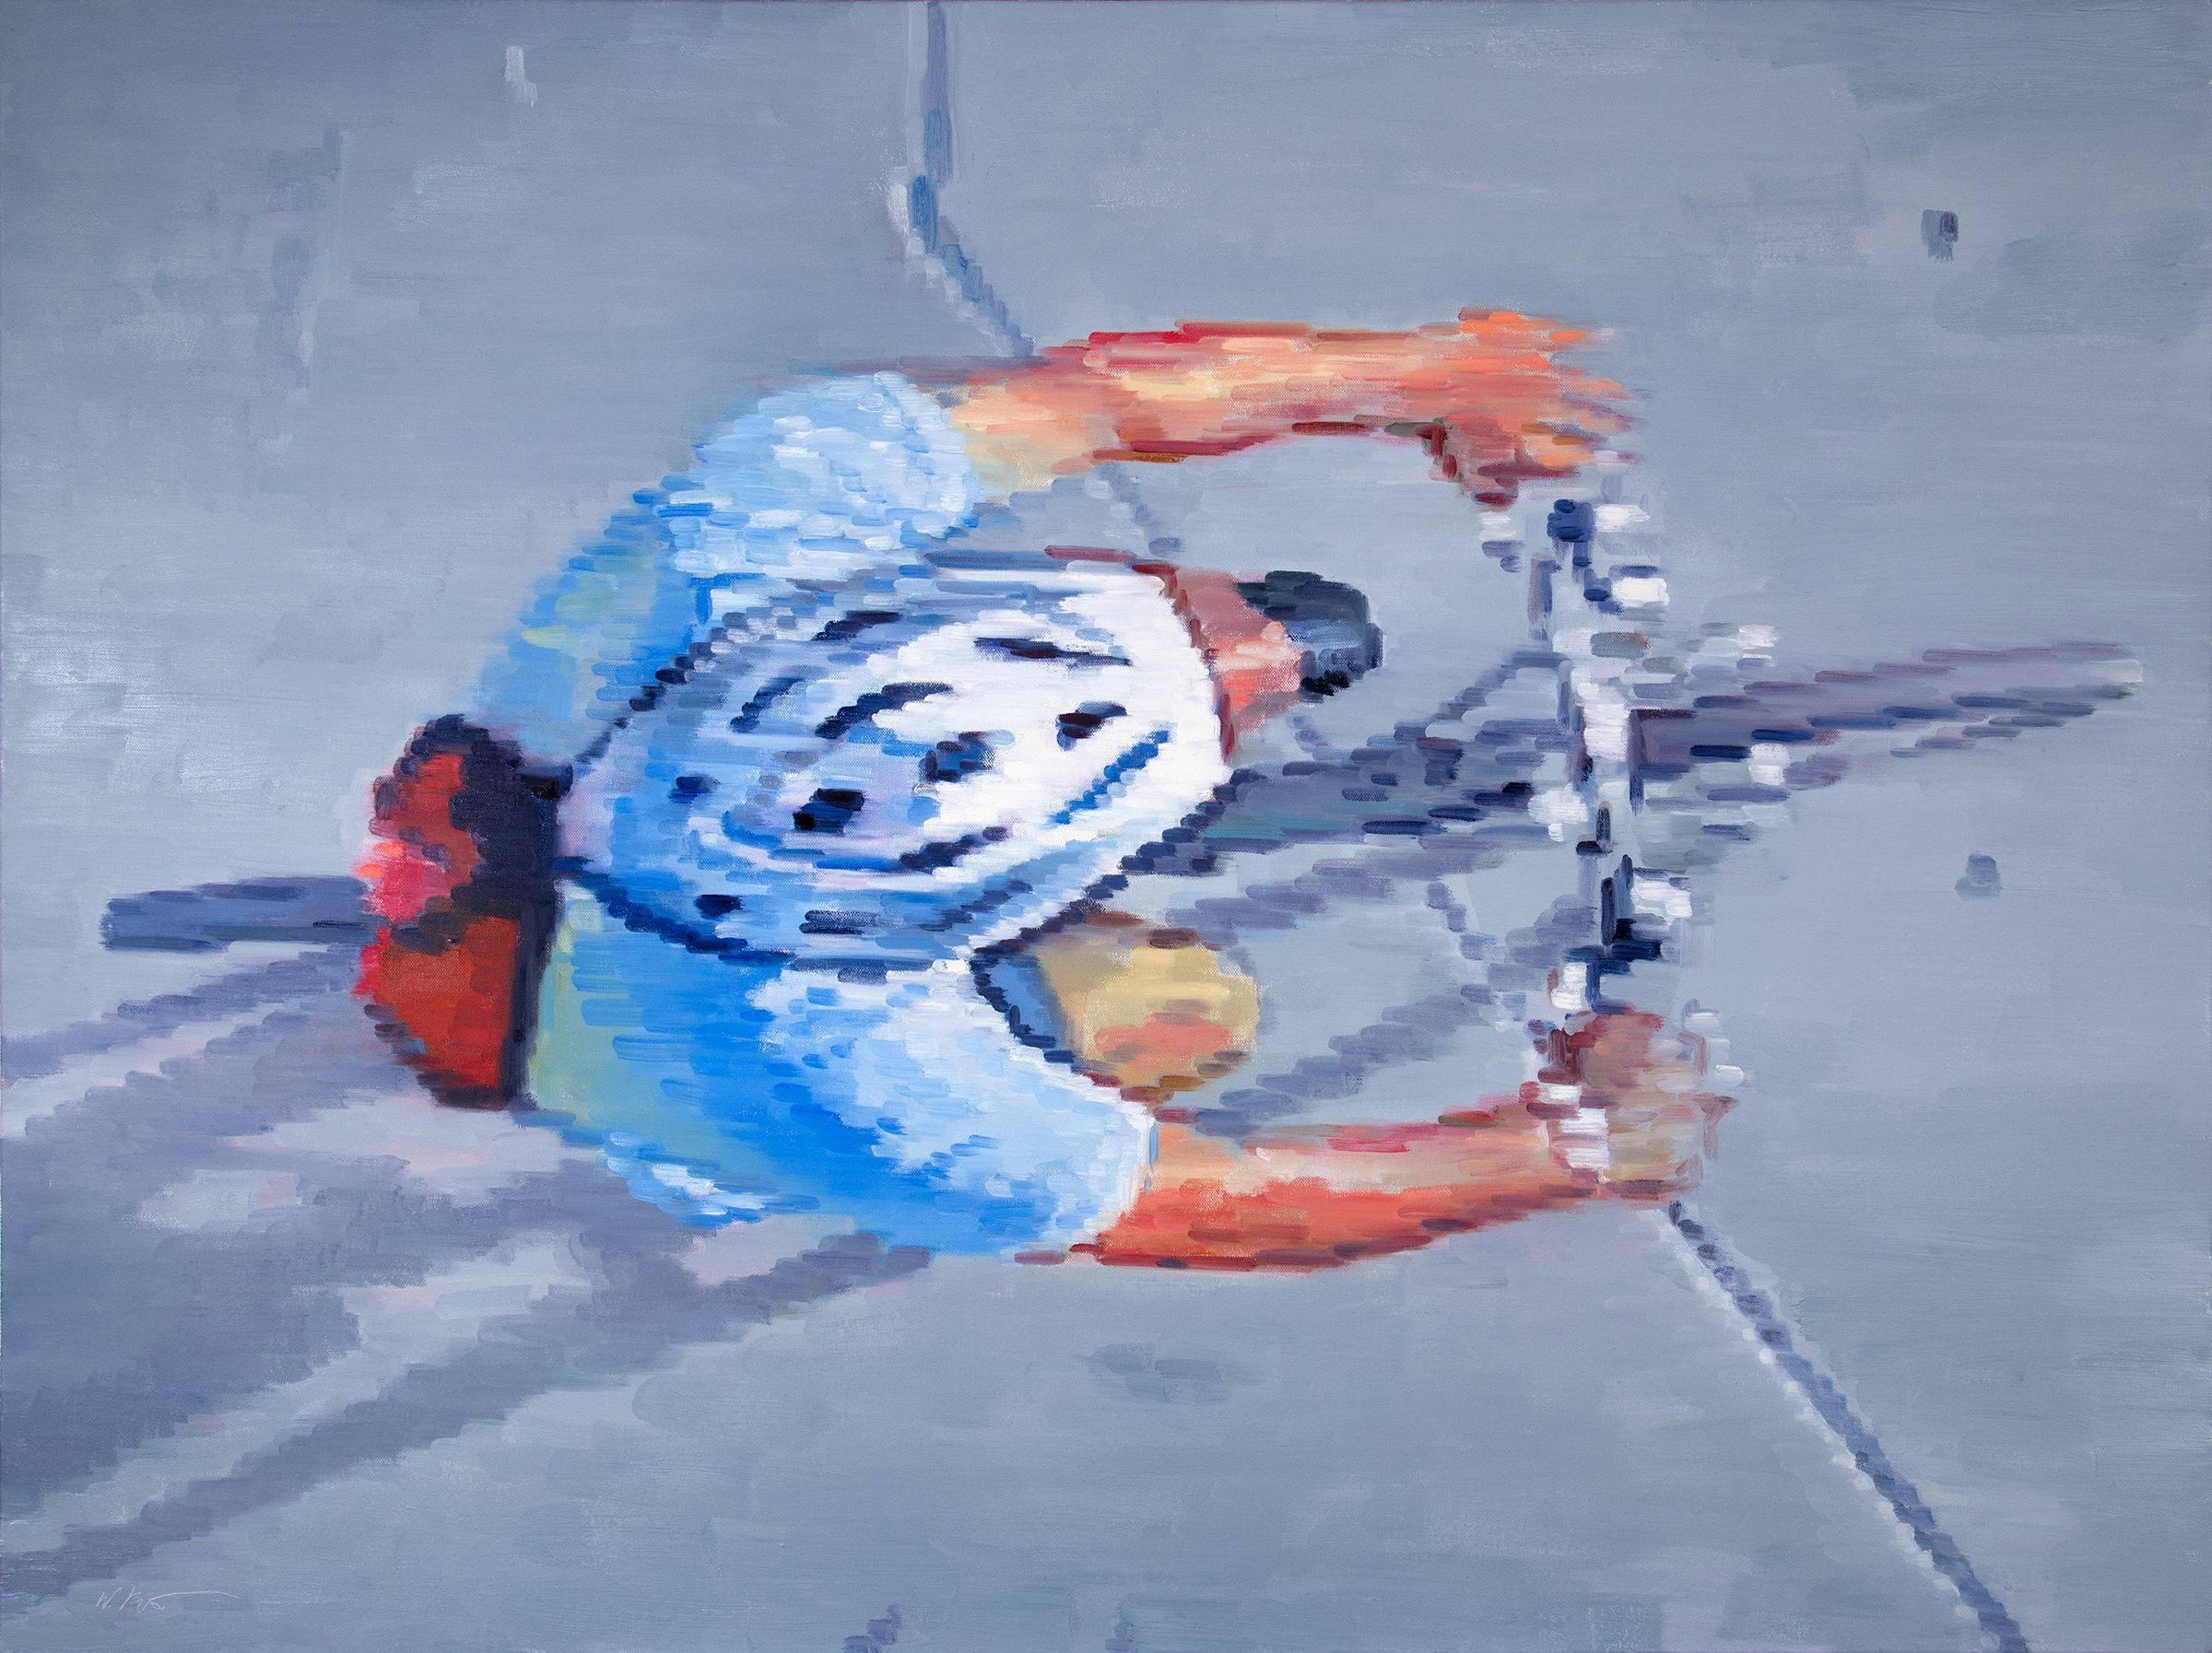 Warren Keating Figurative Painting - Cyclist Wearing Helmet Riding in Santa Monica, Oil Painting on Canvas